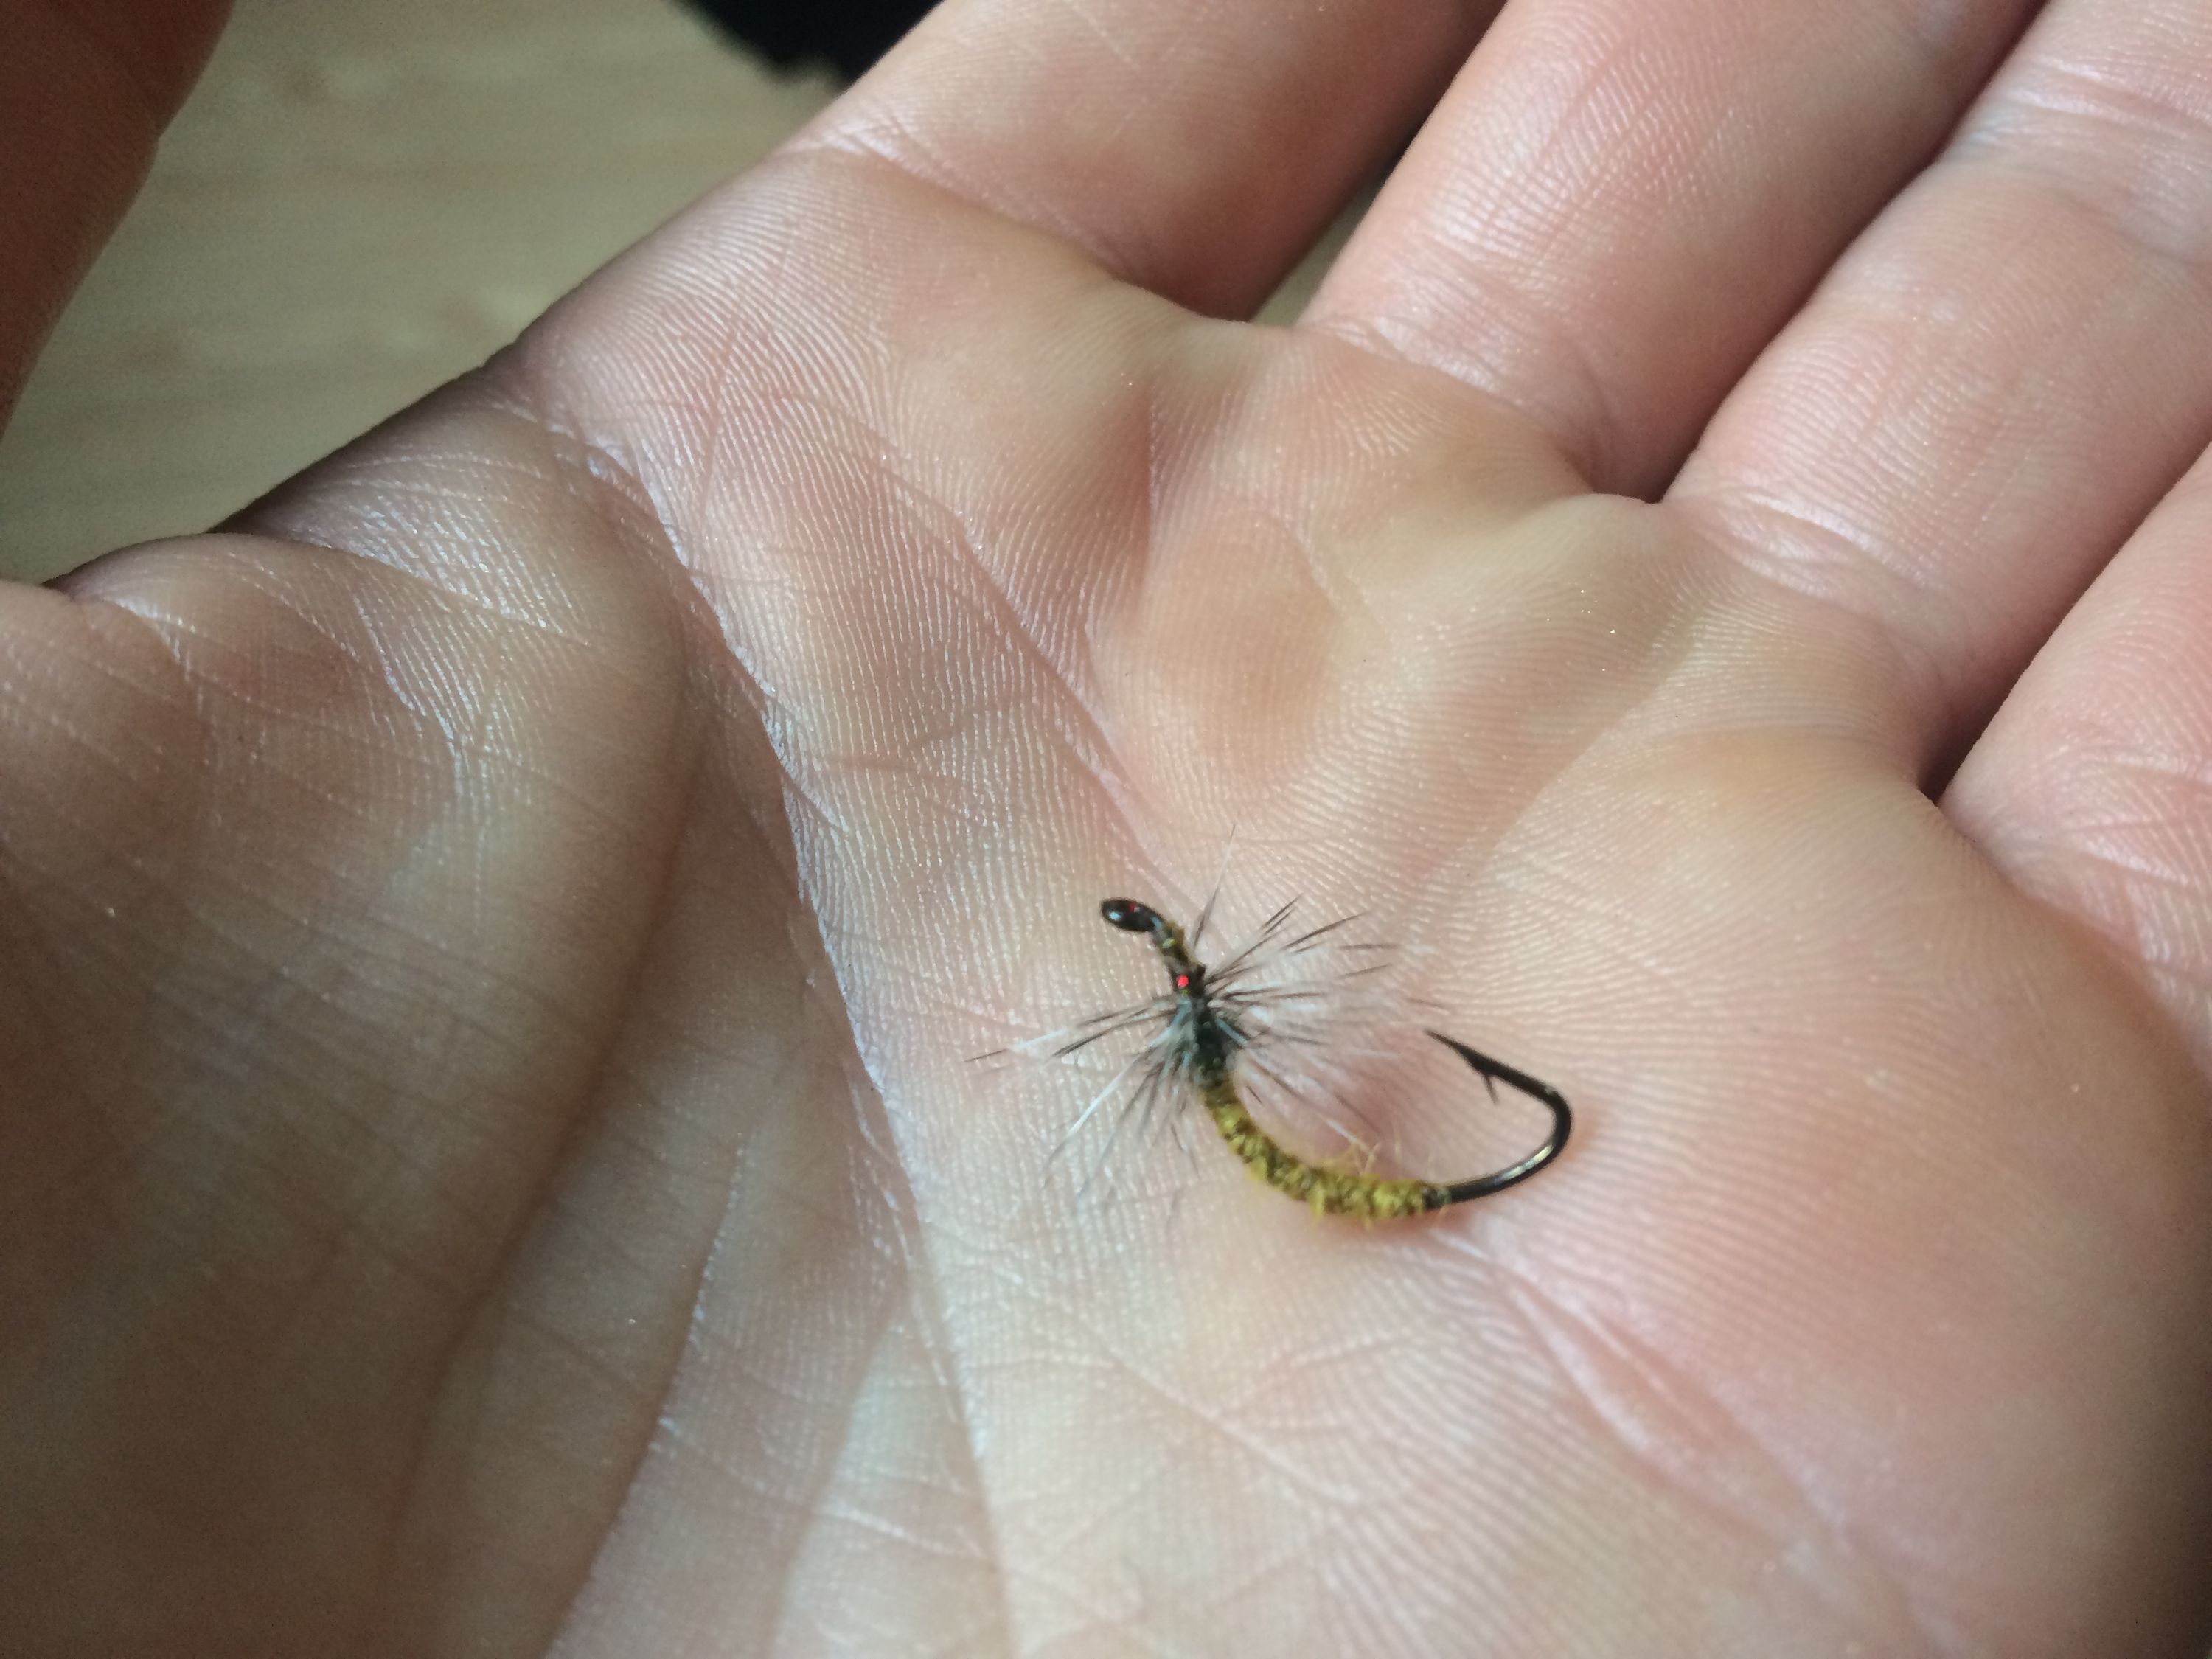 One of the flies in the palm of the author’s left hand, looking very small.